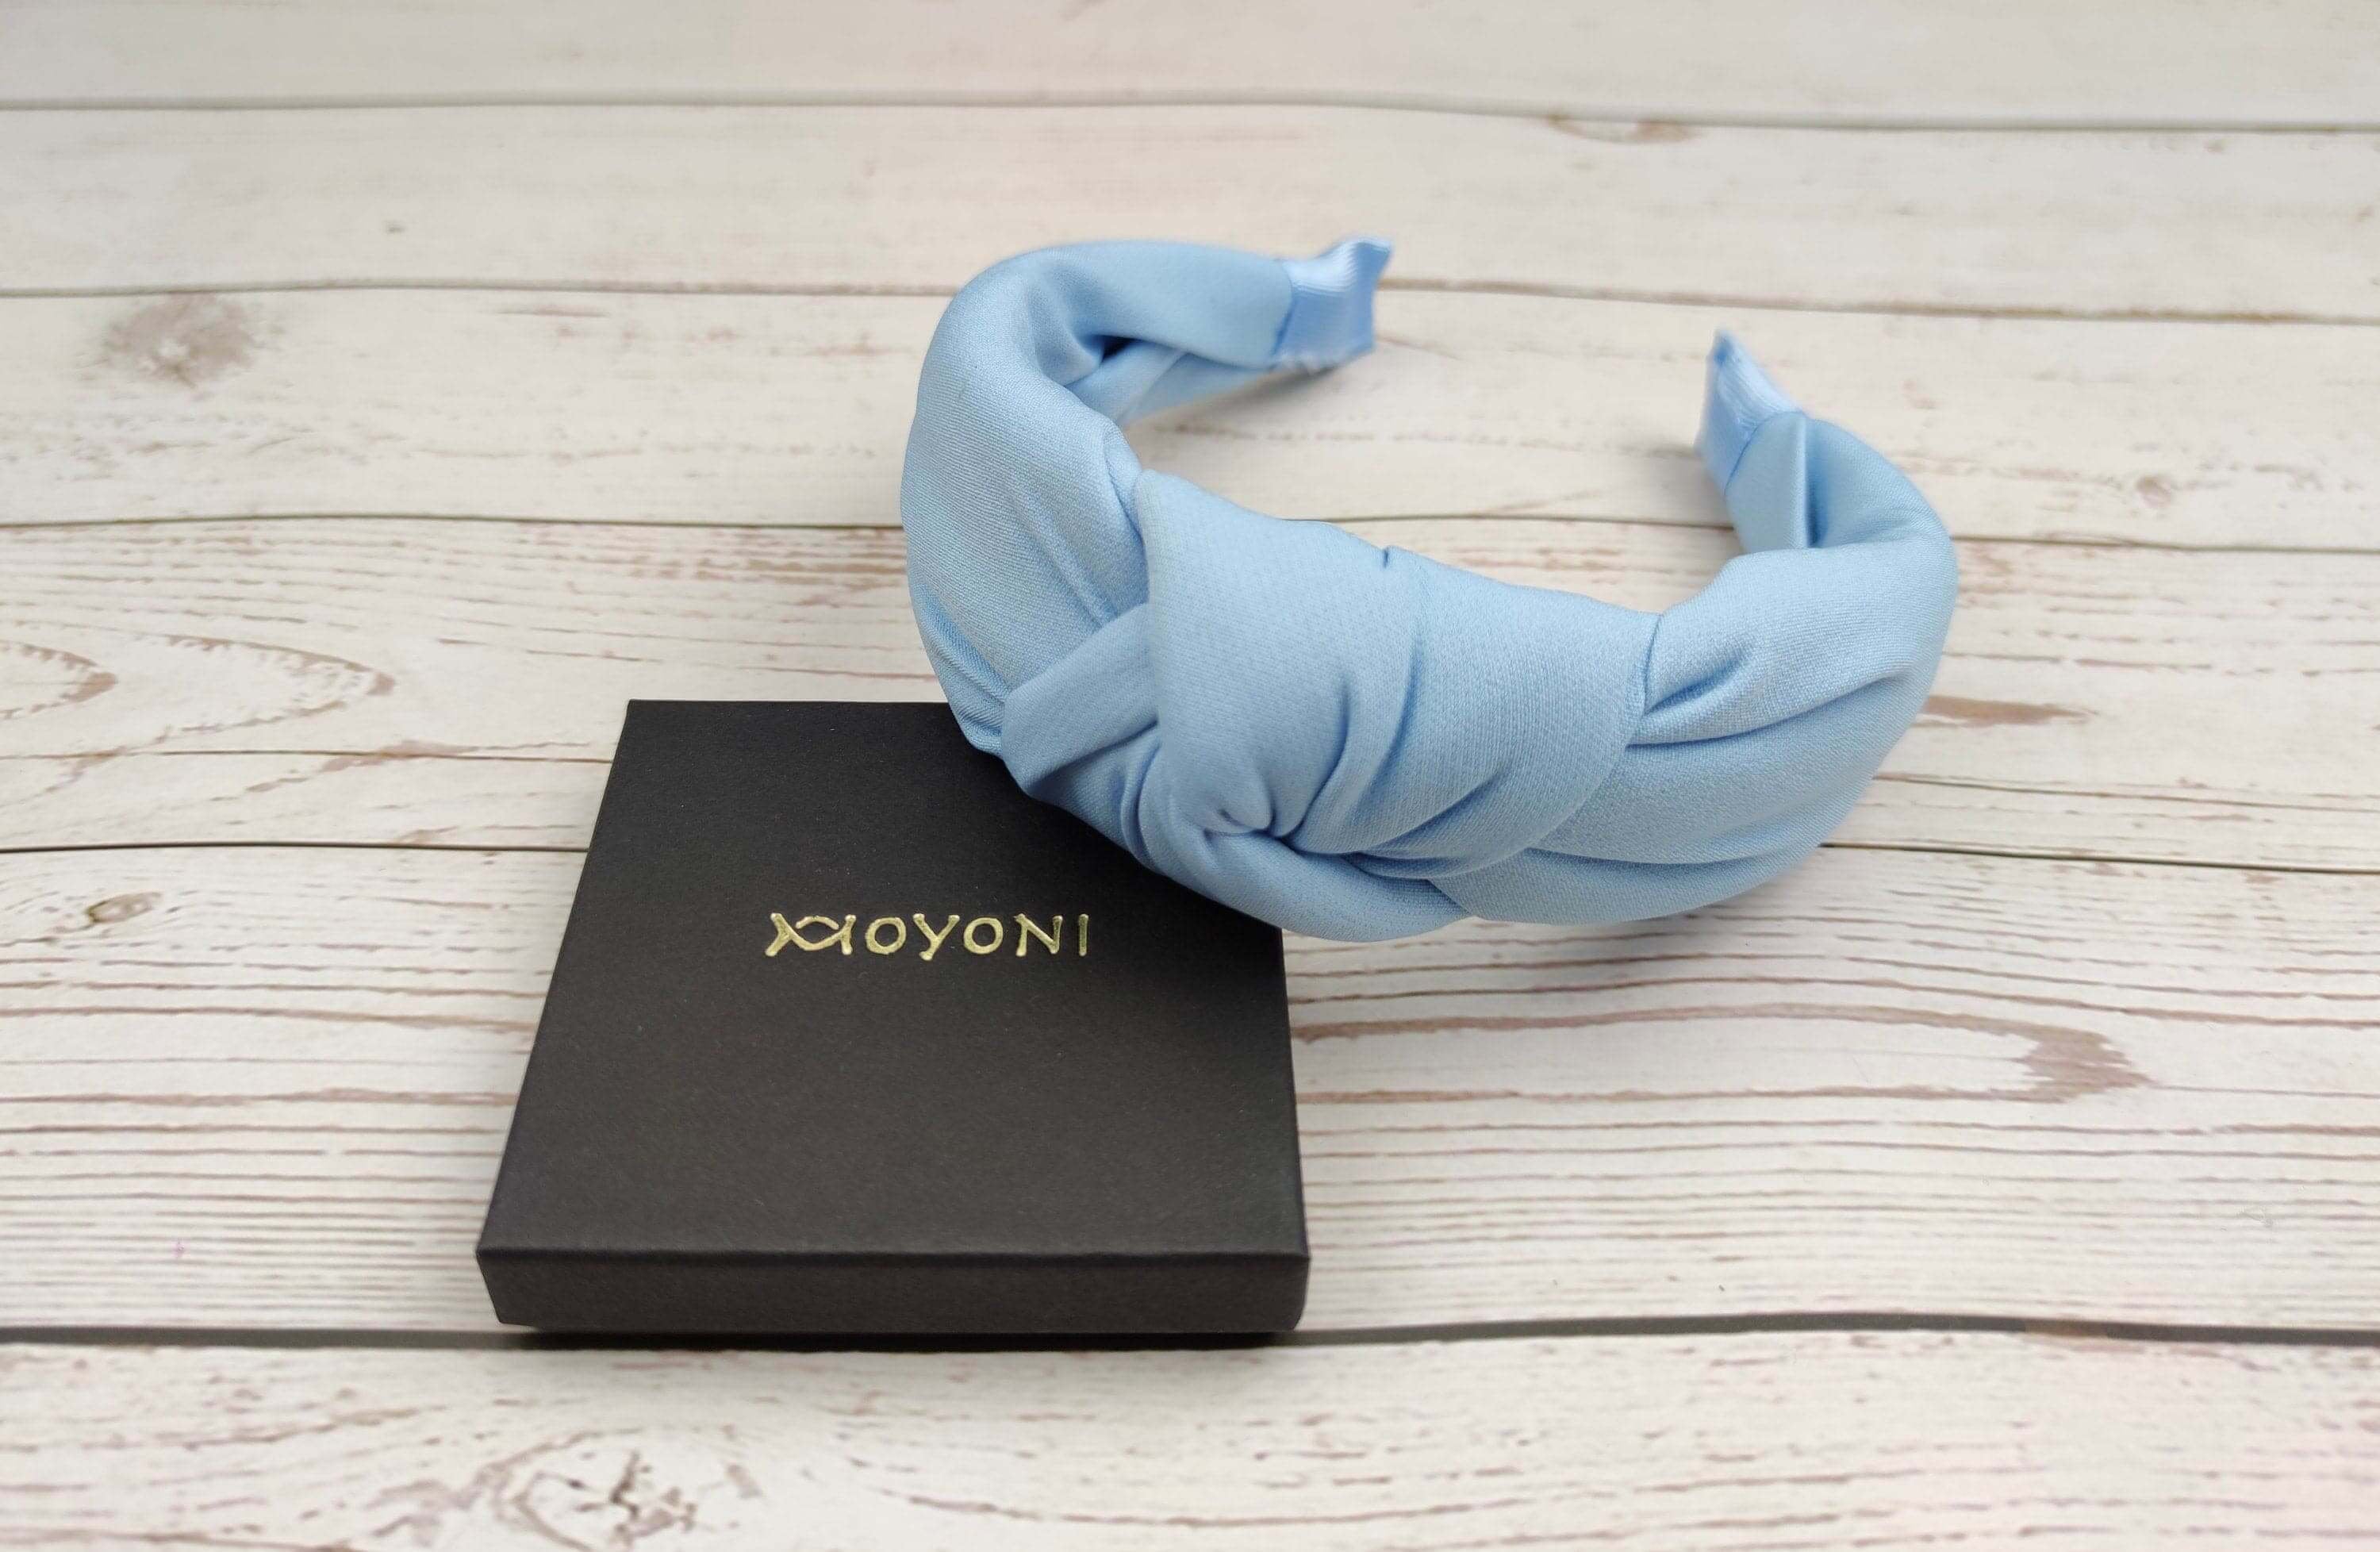 Stay stylish and comfortable with this light blue twist knot headband, featuring a chic design.